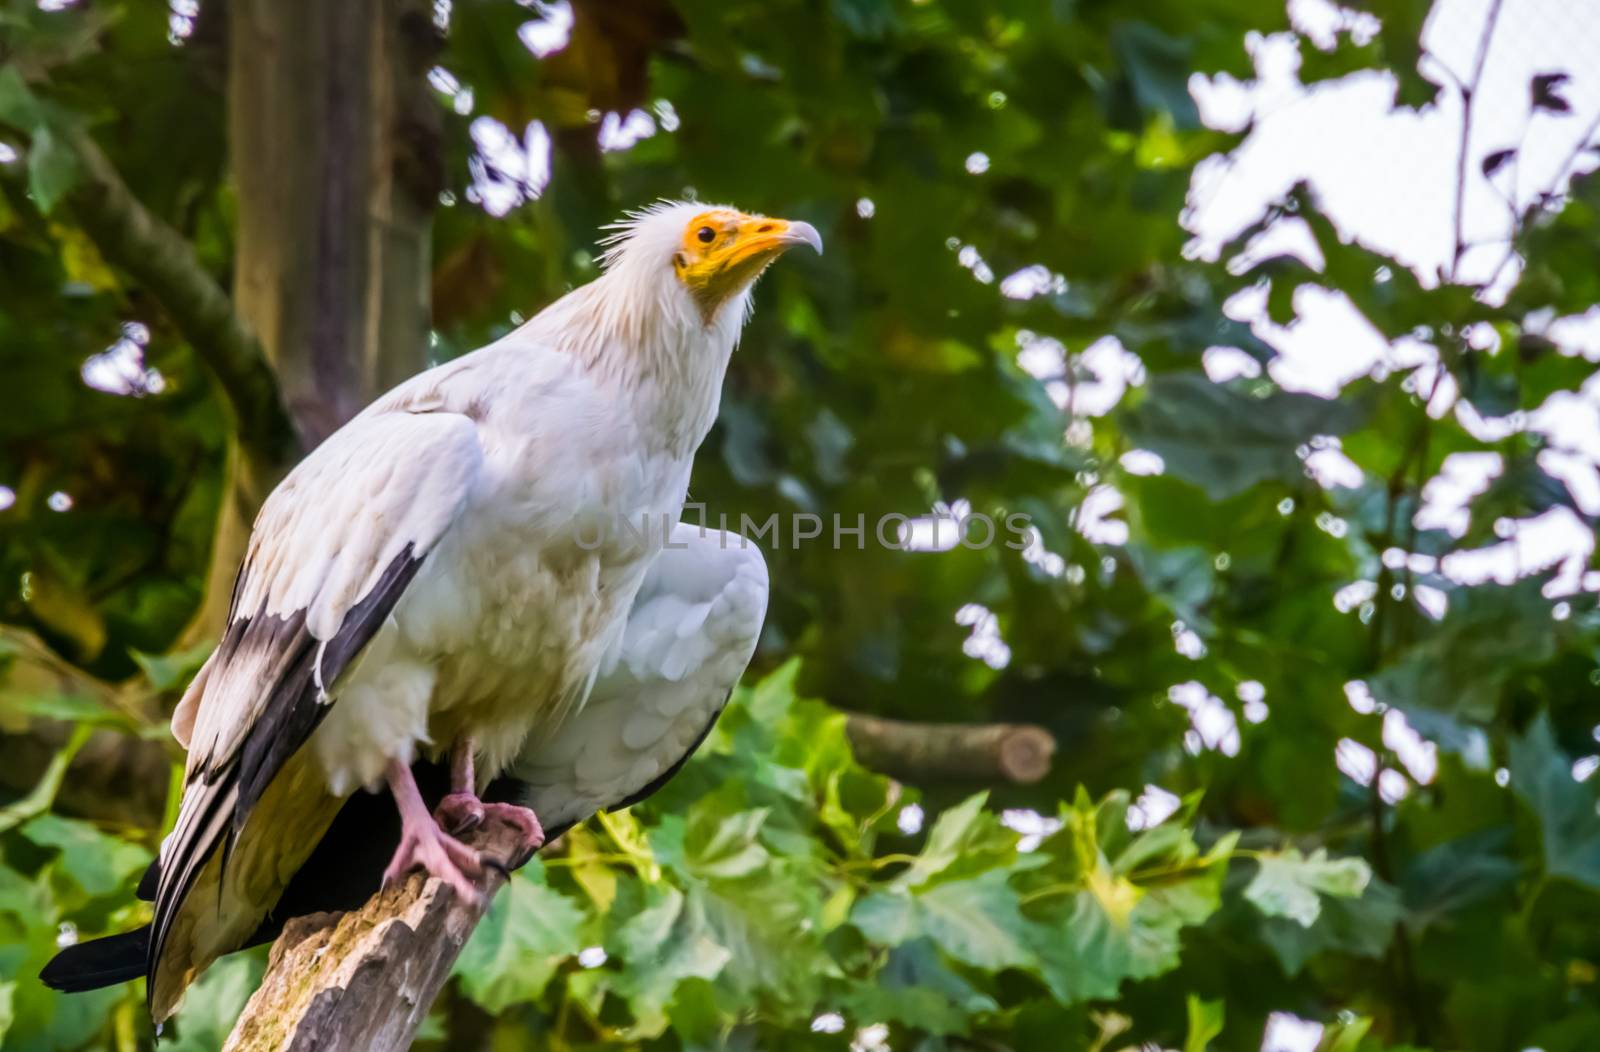 closeup portrait of a white egyptian vulture, Scavenger bird specie from Africa by charlottebleijenberg